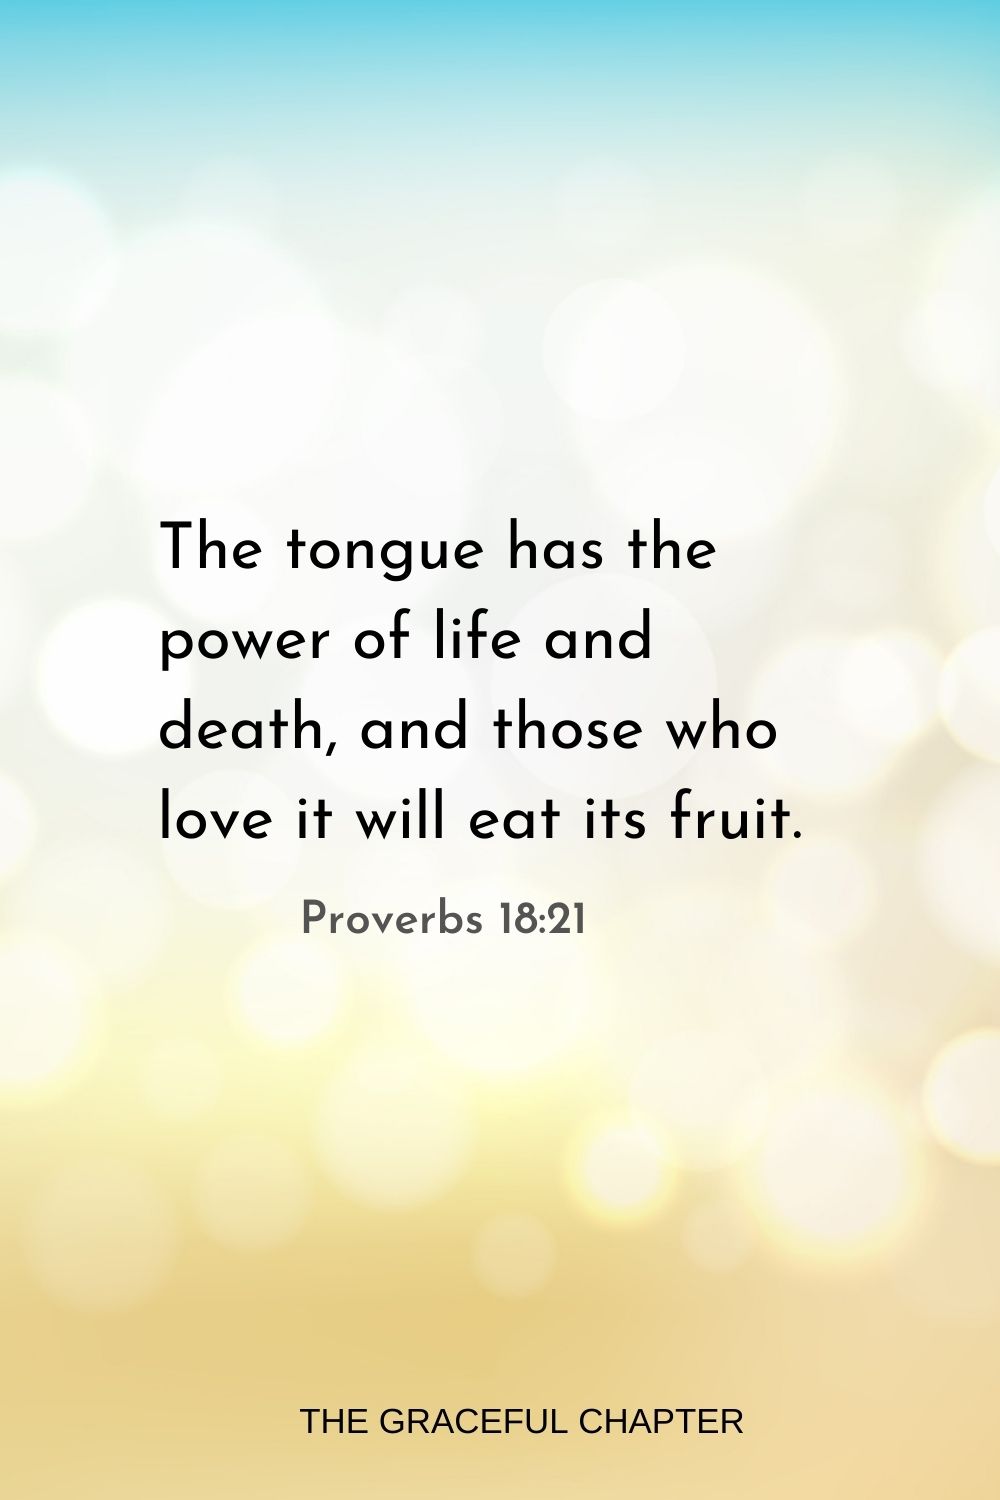 The tongue has the power of life and death, and those who love it will eat its fruit. Proverbs 18:21